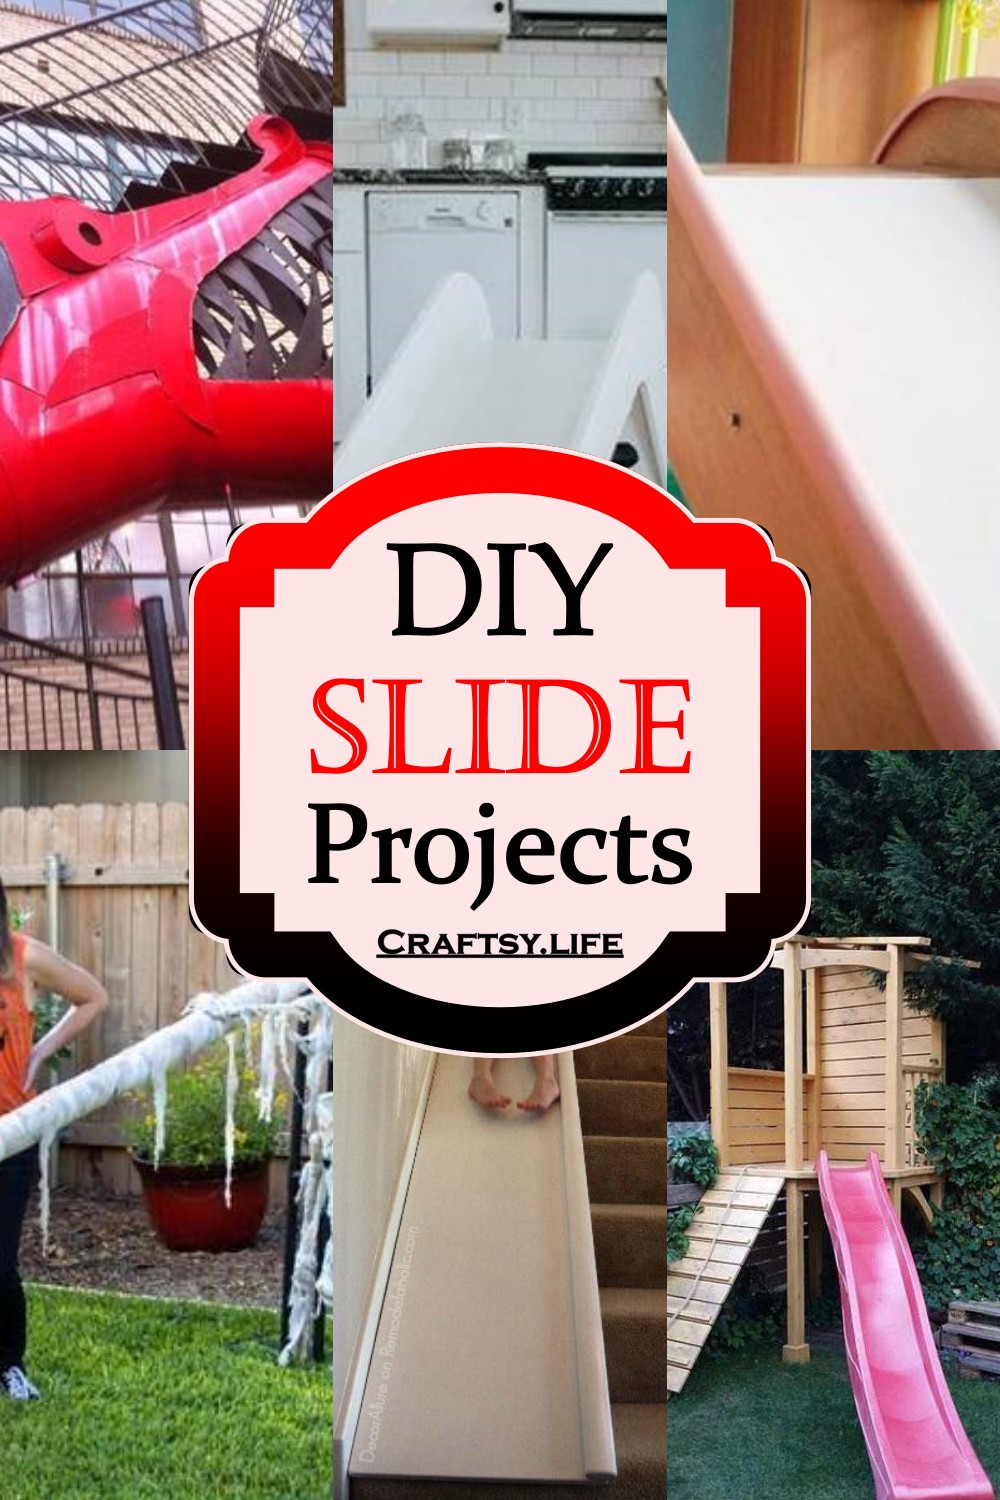 DIY Slide Projects